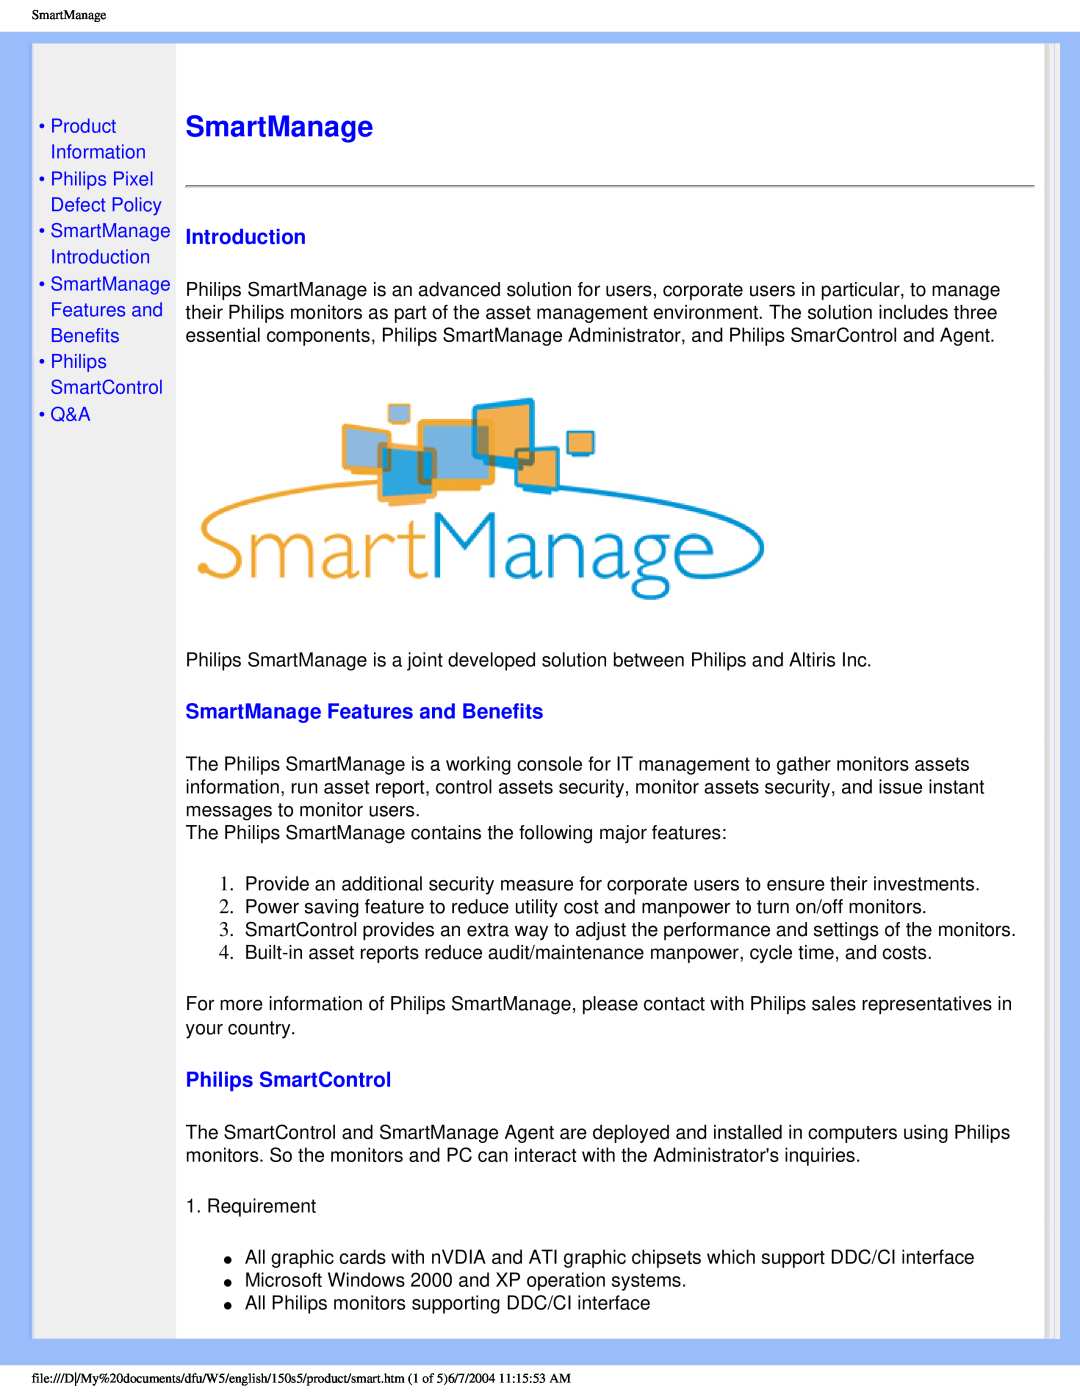 Philips 150S5FS user manual Introduction, SmartManage Features and Benefits, Philips SmartControl Q&A 